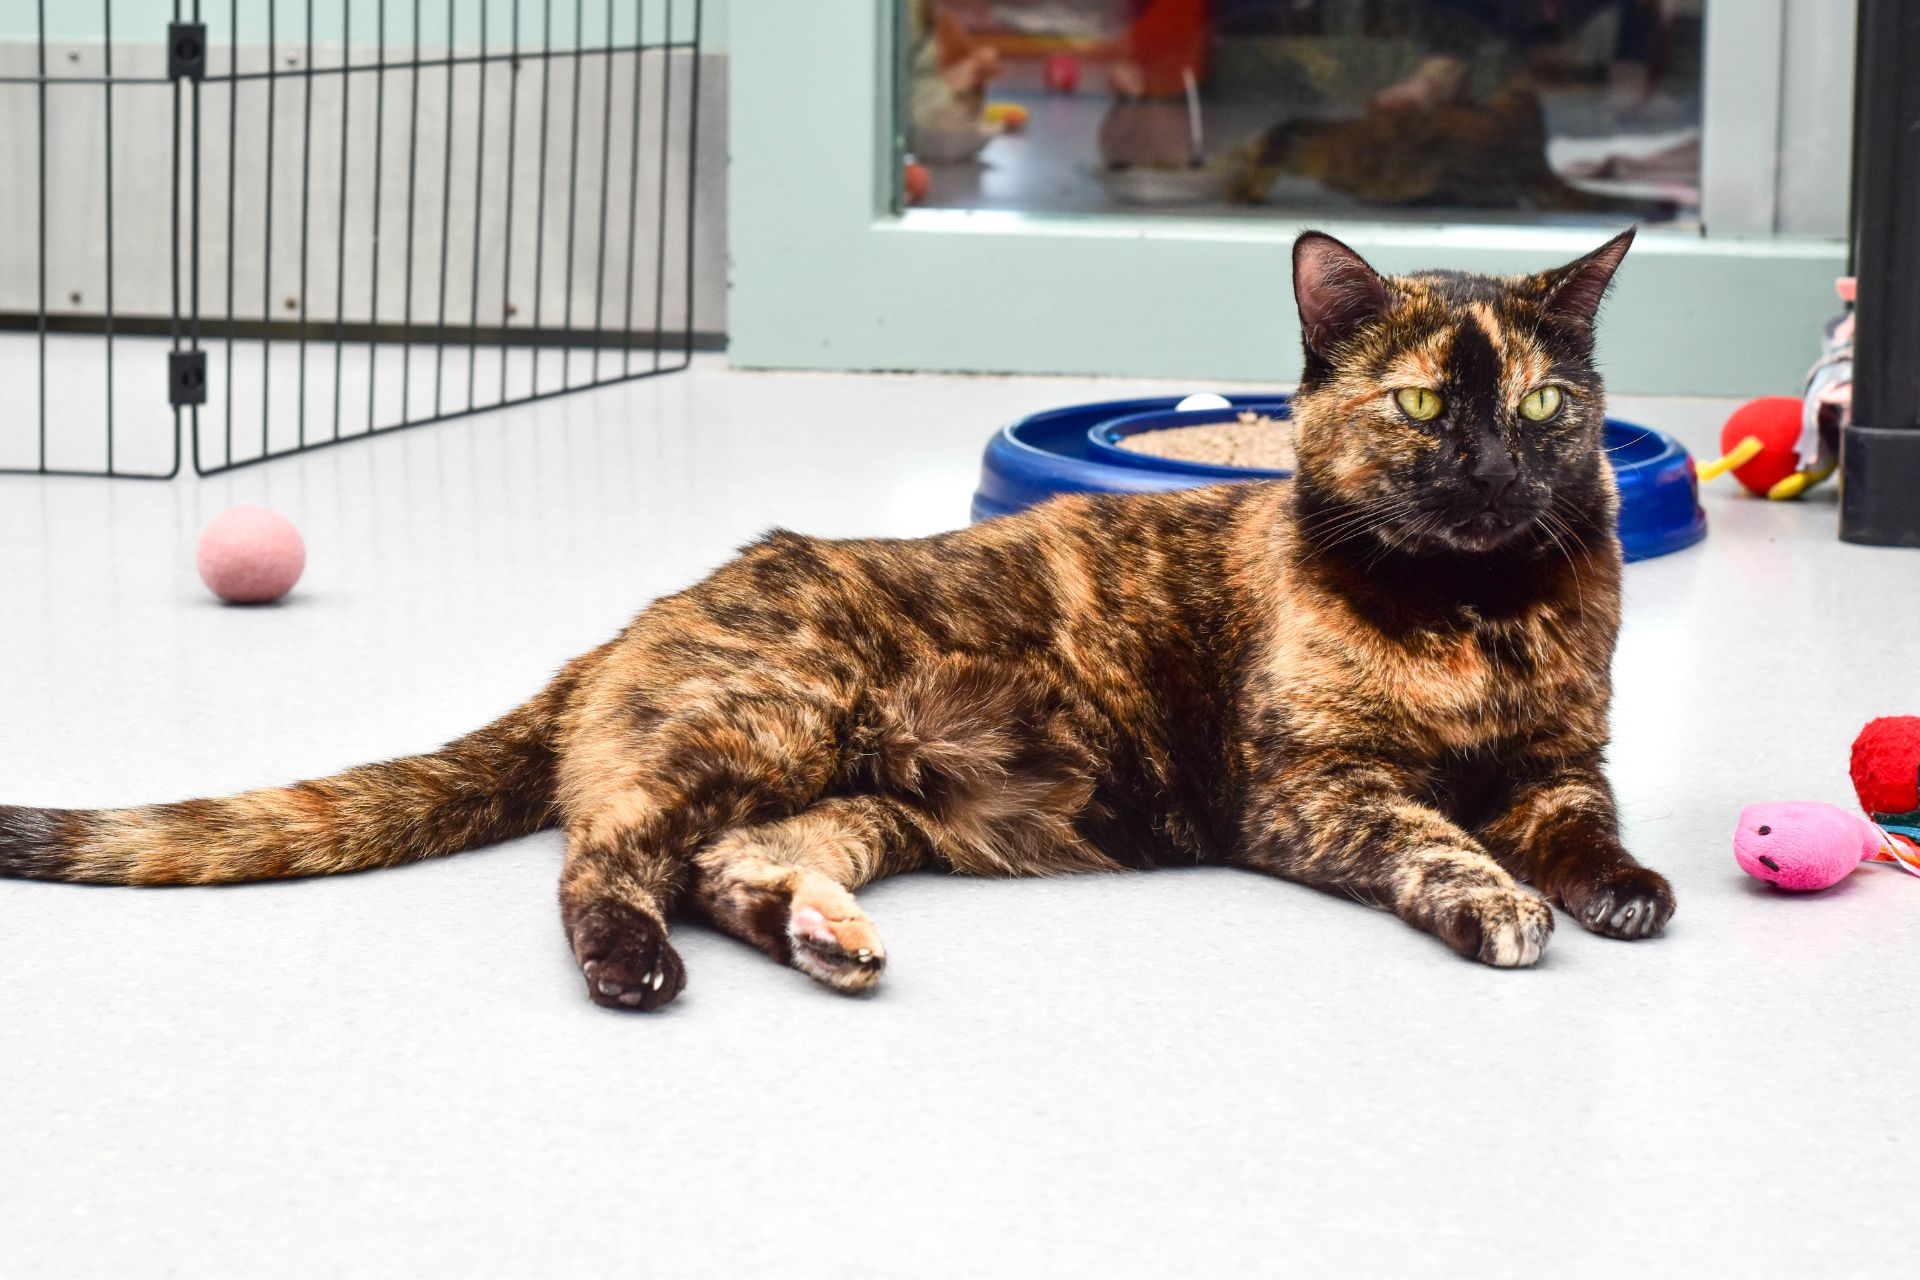 A tortie cat lays on the ground in a cat shelter